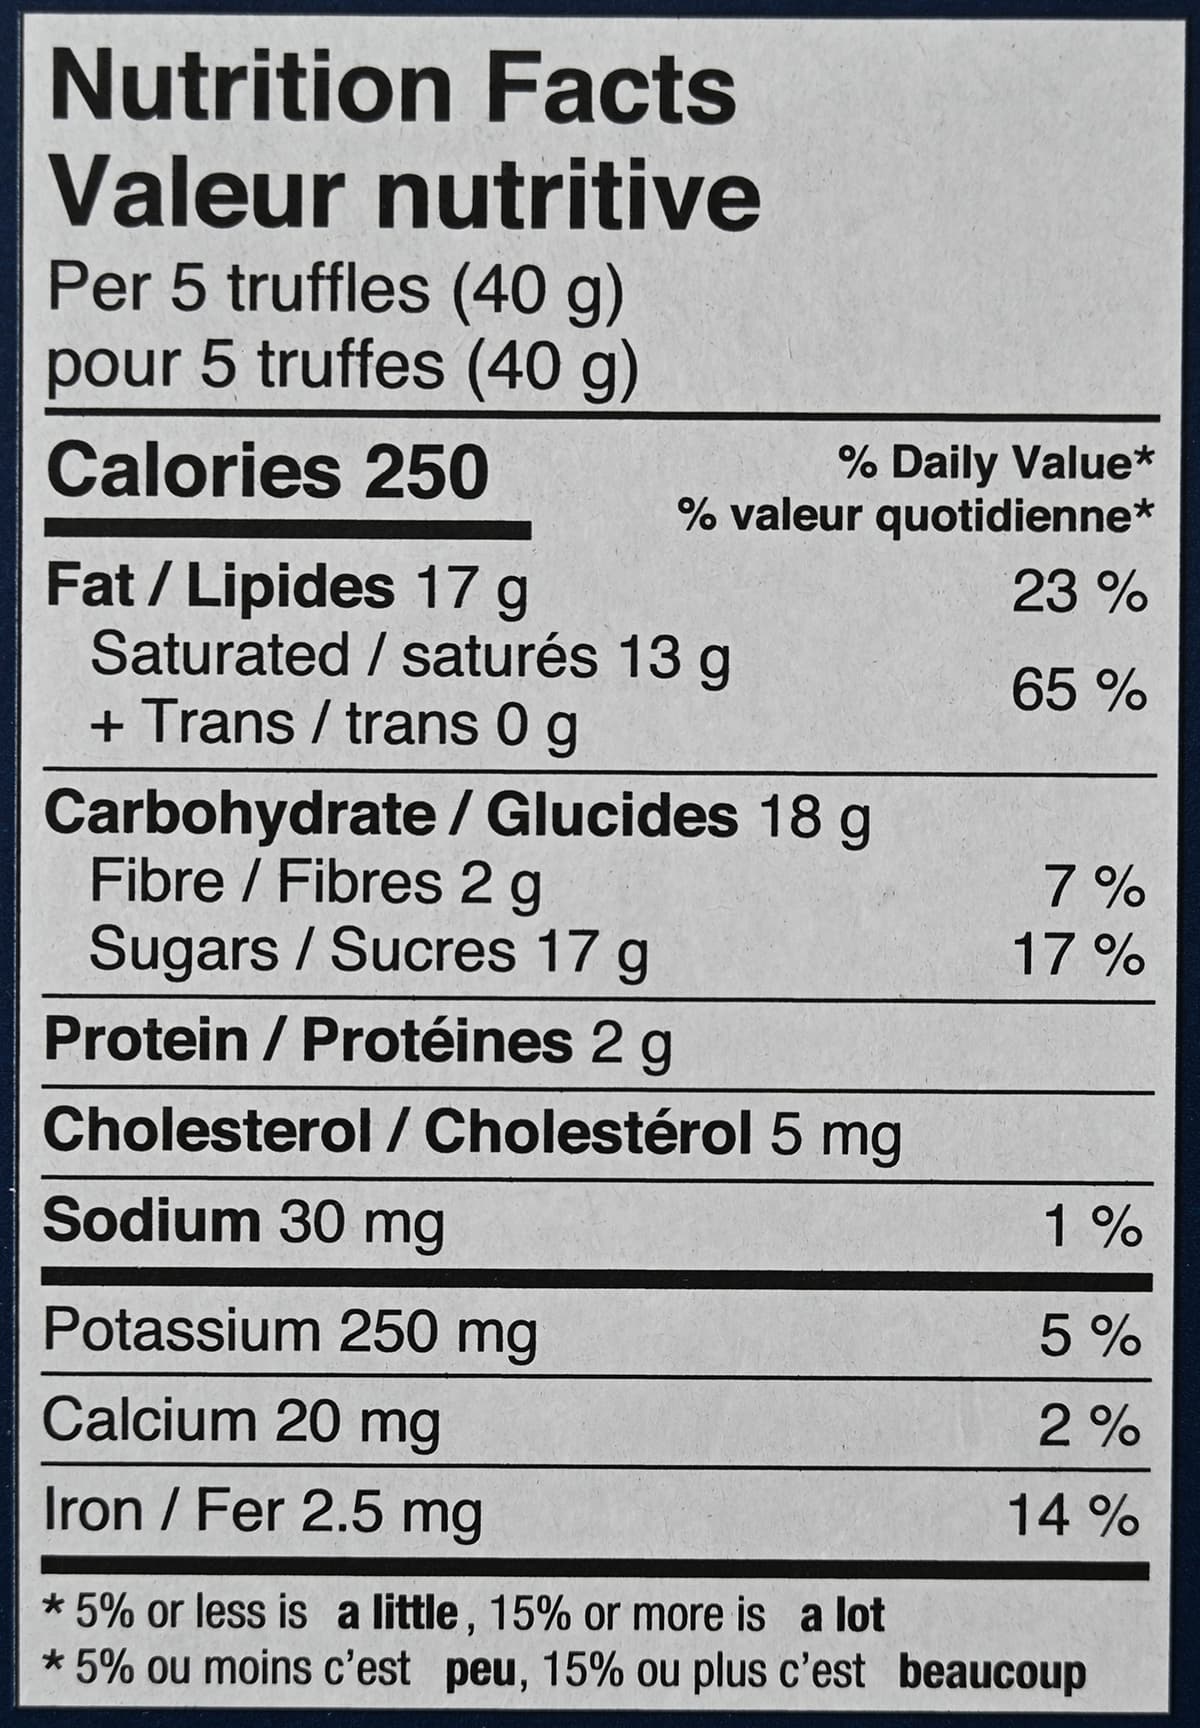 Image of the nutrition facts for the truffles from the back of the box.